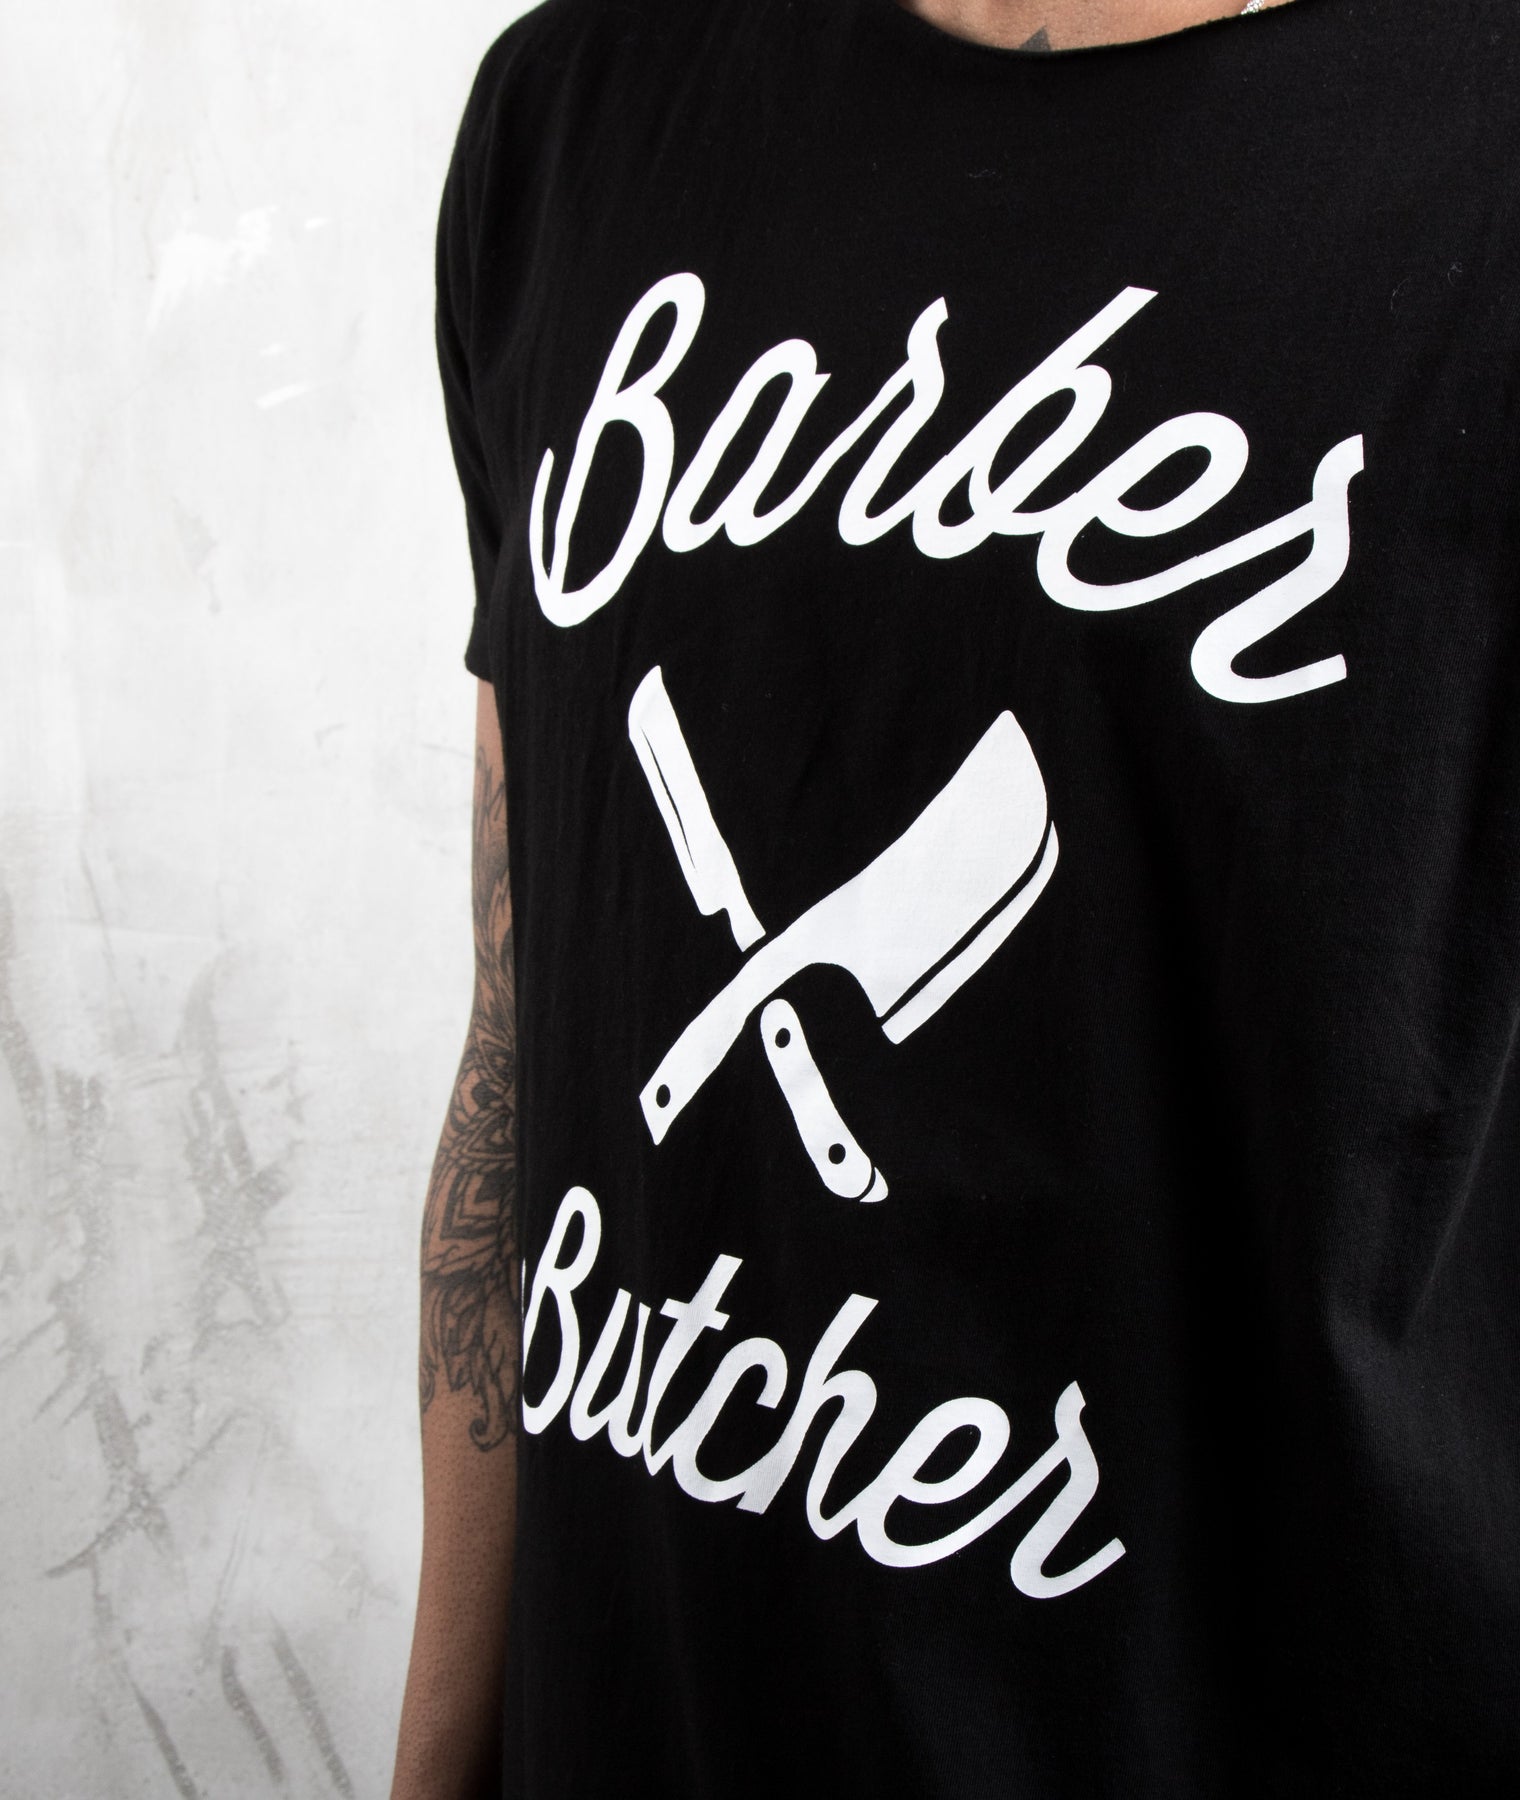 Blades Barber Distorted T-Shirt – Butcher People USA Distorted & | Black People Neck Cut